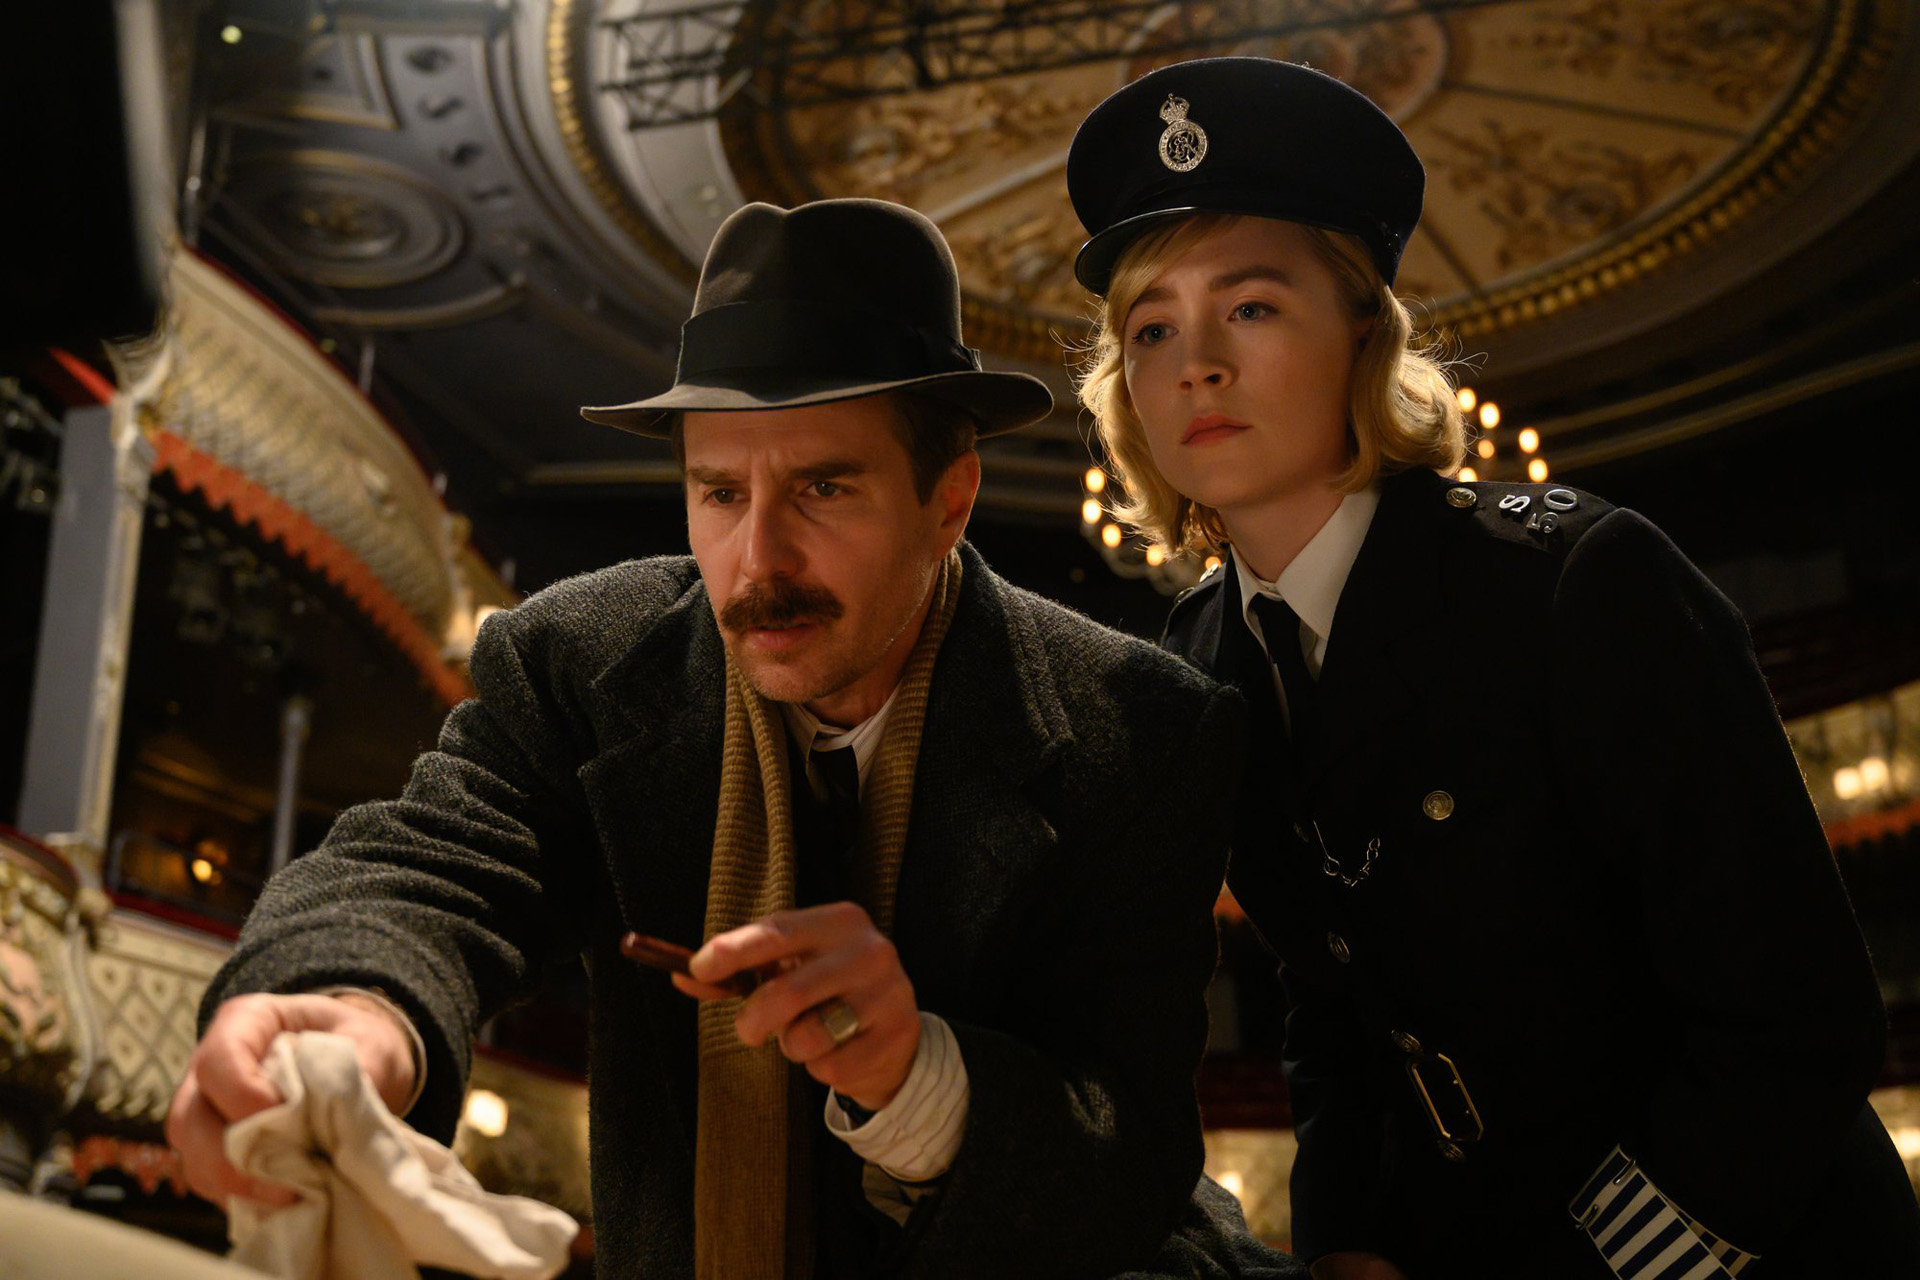 Sam Rockwell and Saoirse Ronan in the film SEE HOW THEY RUN